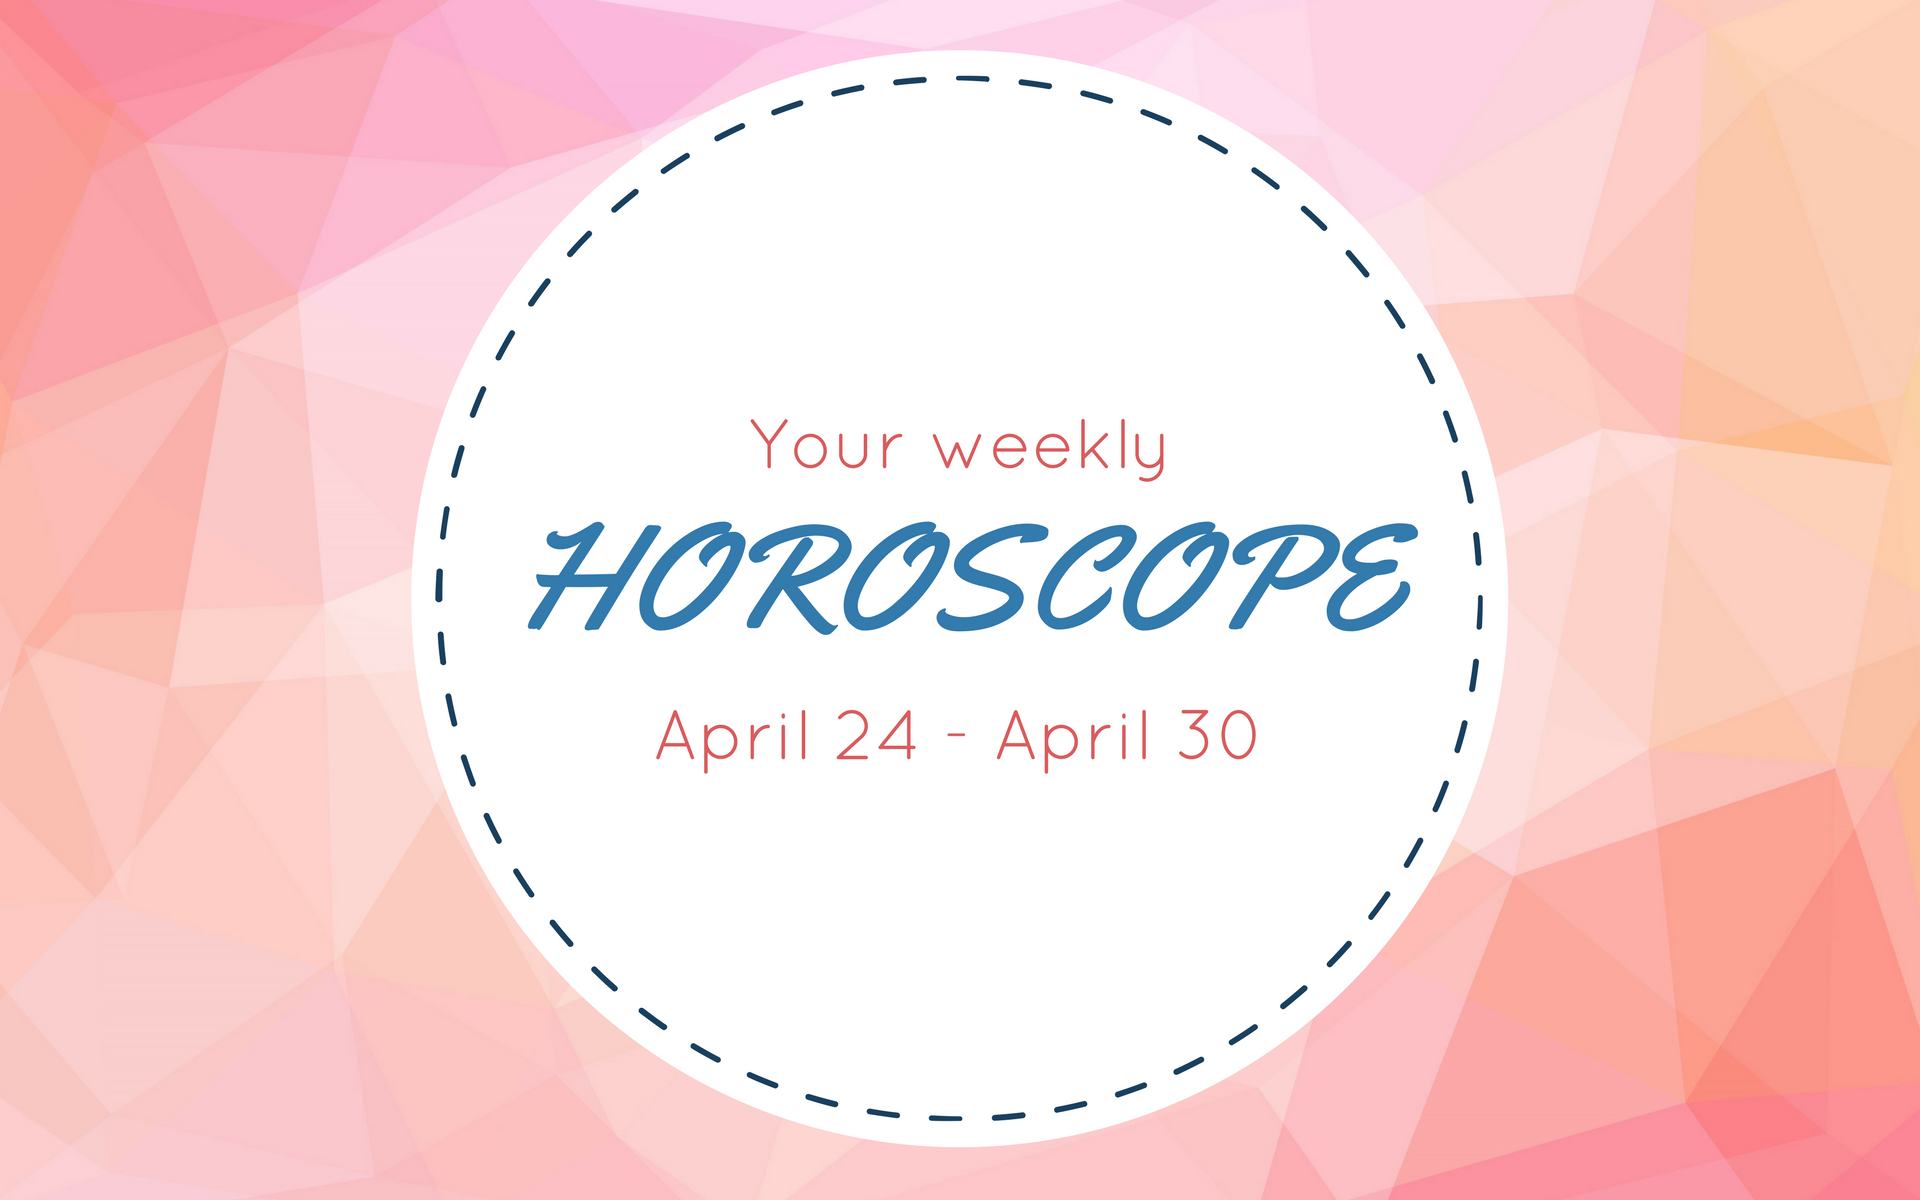 Your Weekly Horoscope: April 24 - April 30